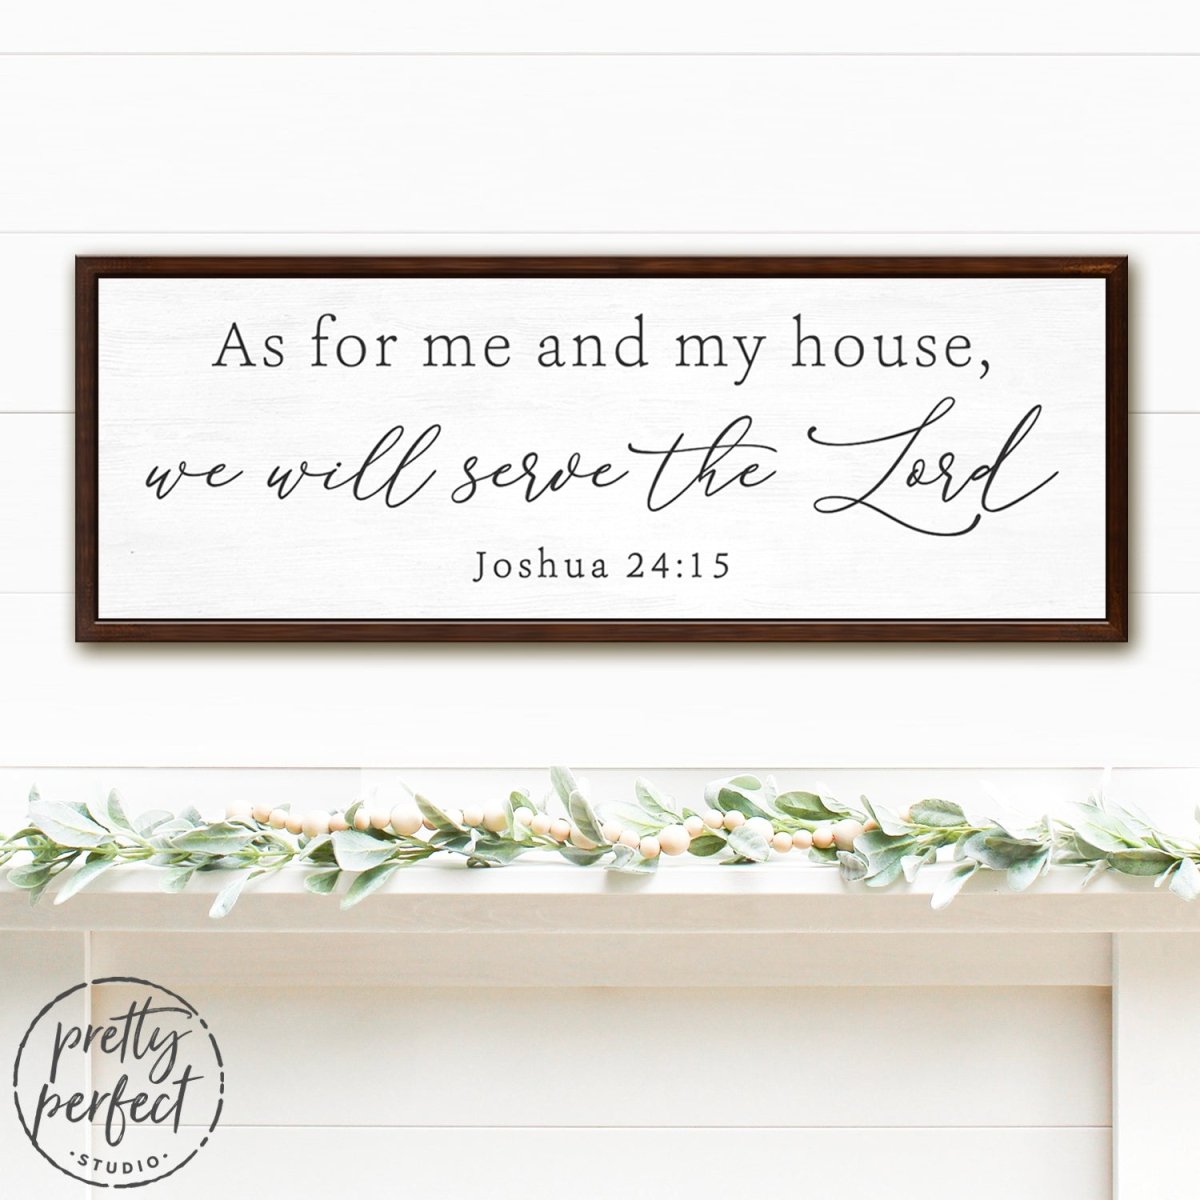 But As For Me And My House, We Will Serve The Lord Sign by Joshua 24:15 - Pretty Perfect Studio